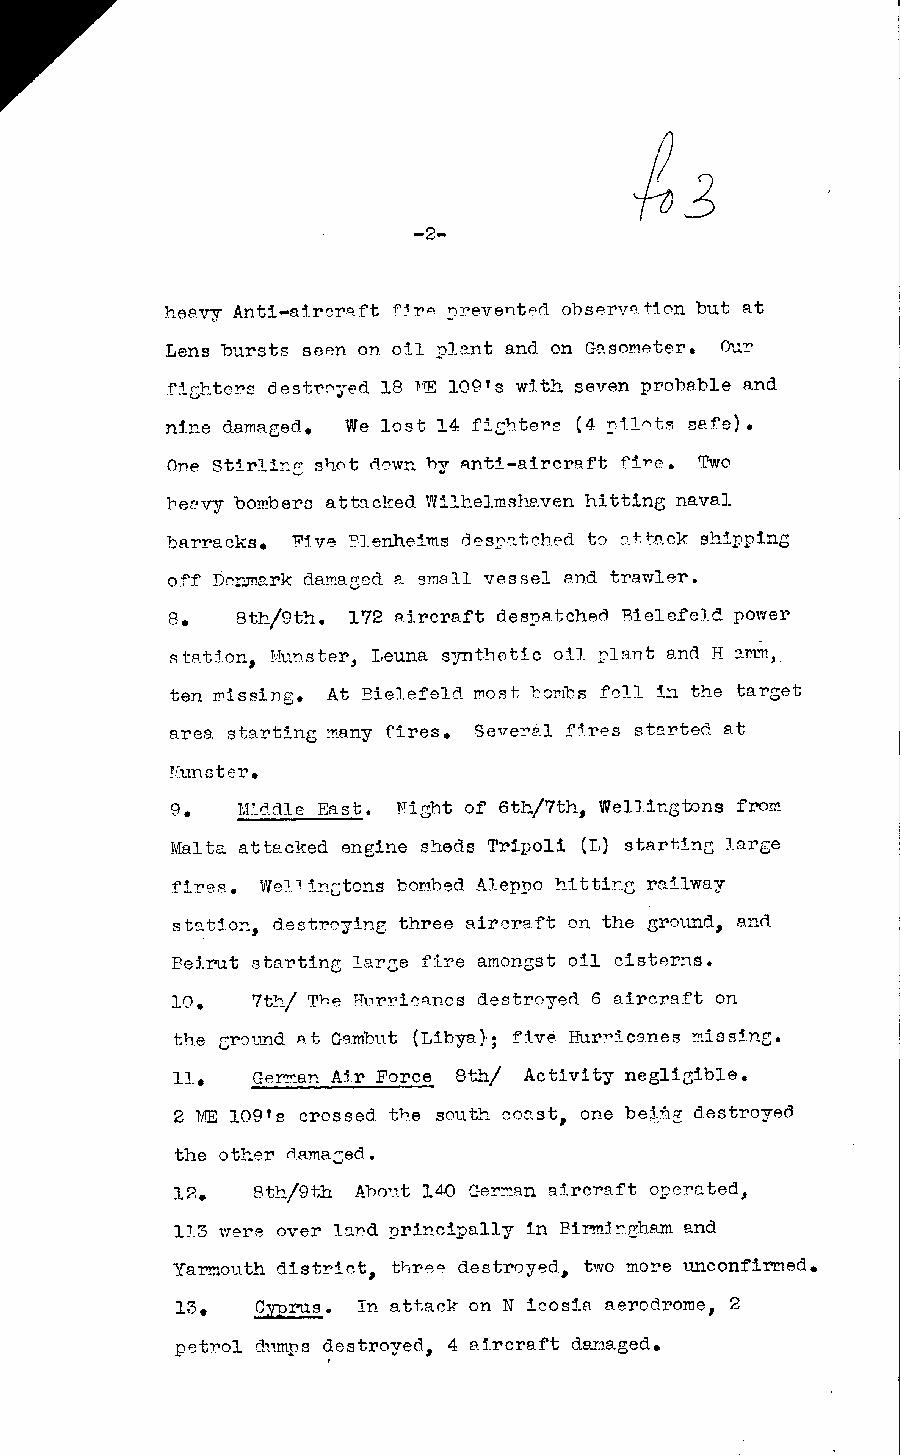 [a322f03.jpg] - Cont-Report on military situation 7/9/41